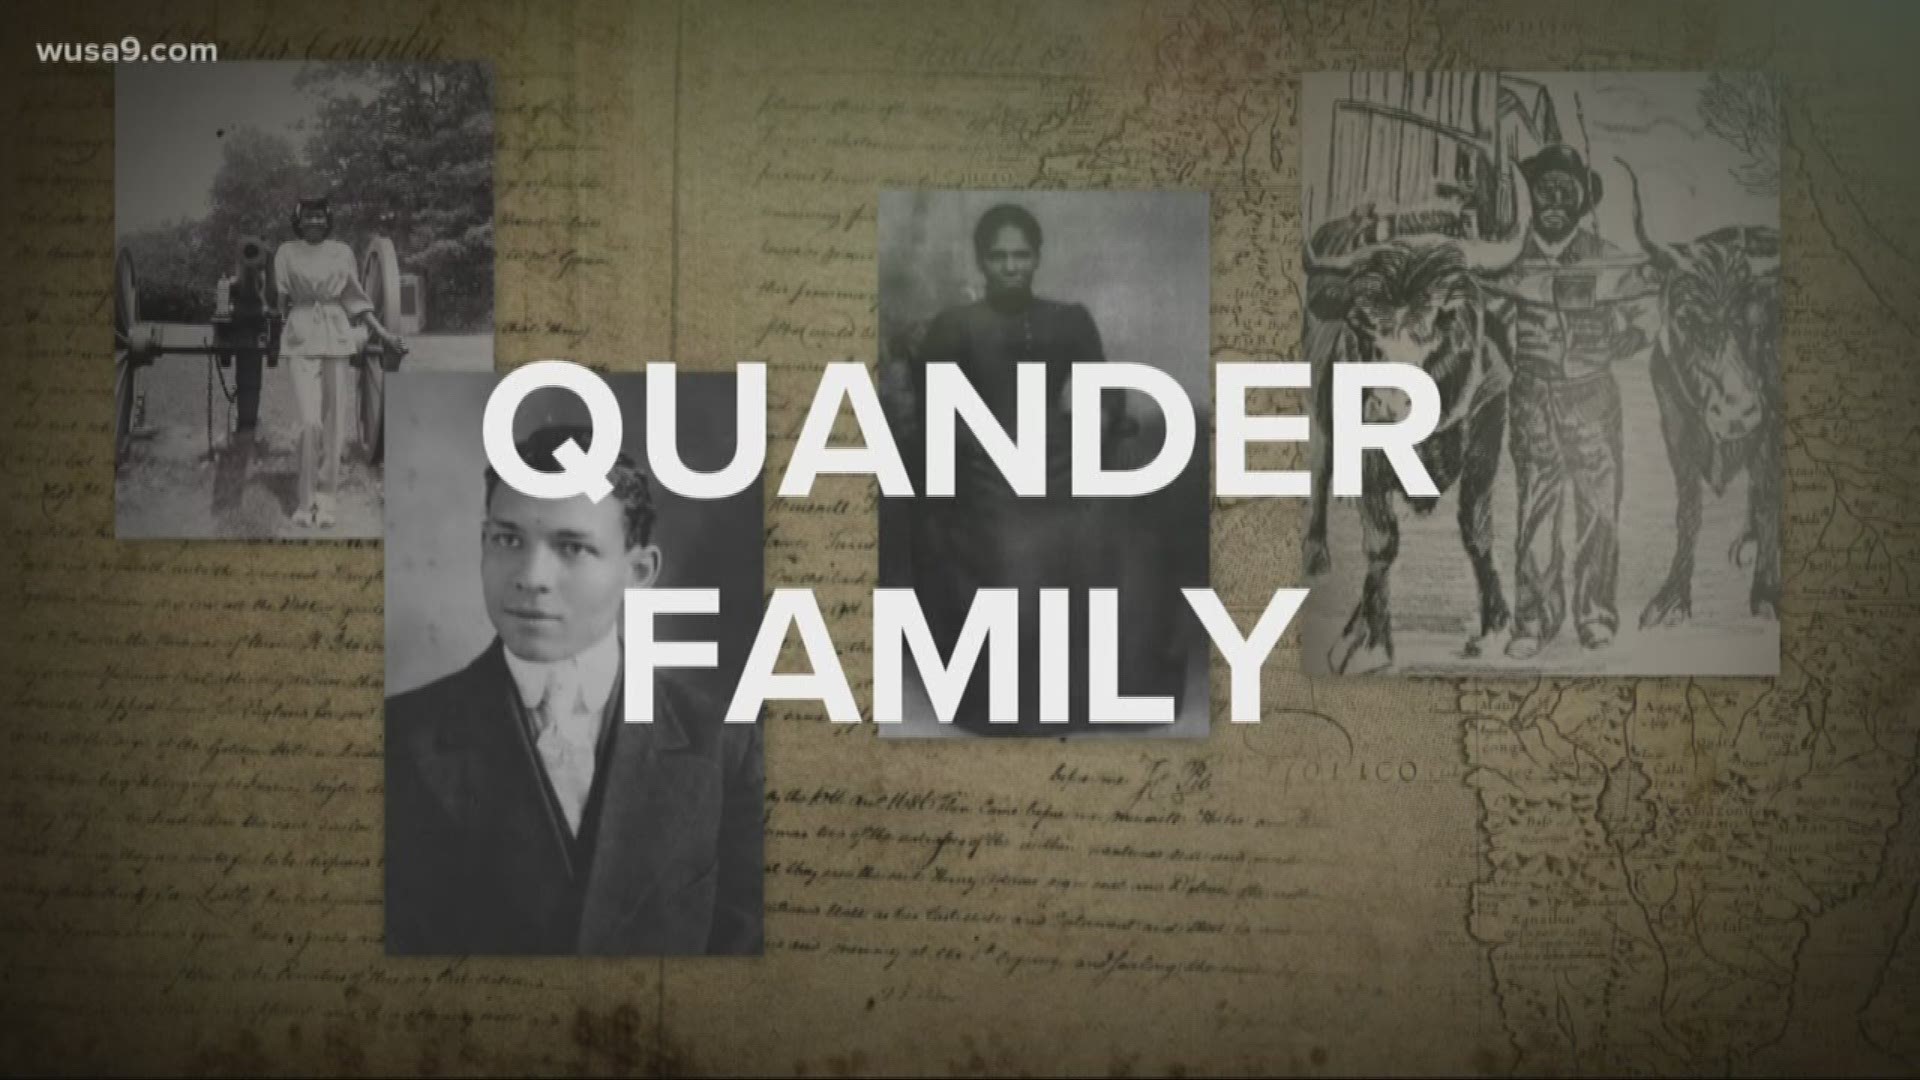 The Quander family is one of the oldest documented black families in America. The D.C.-area based family can trace their history in the United States back more than 330 years.